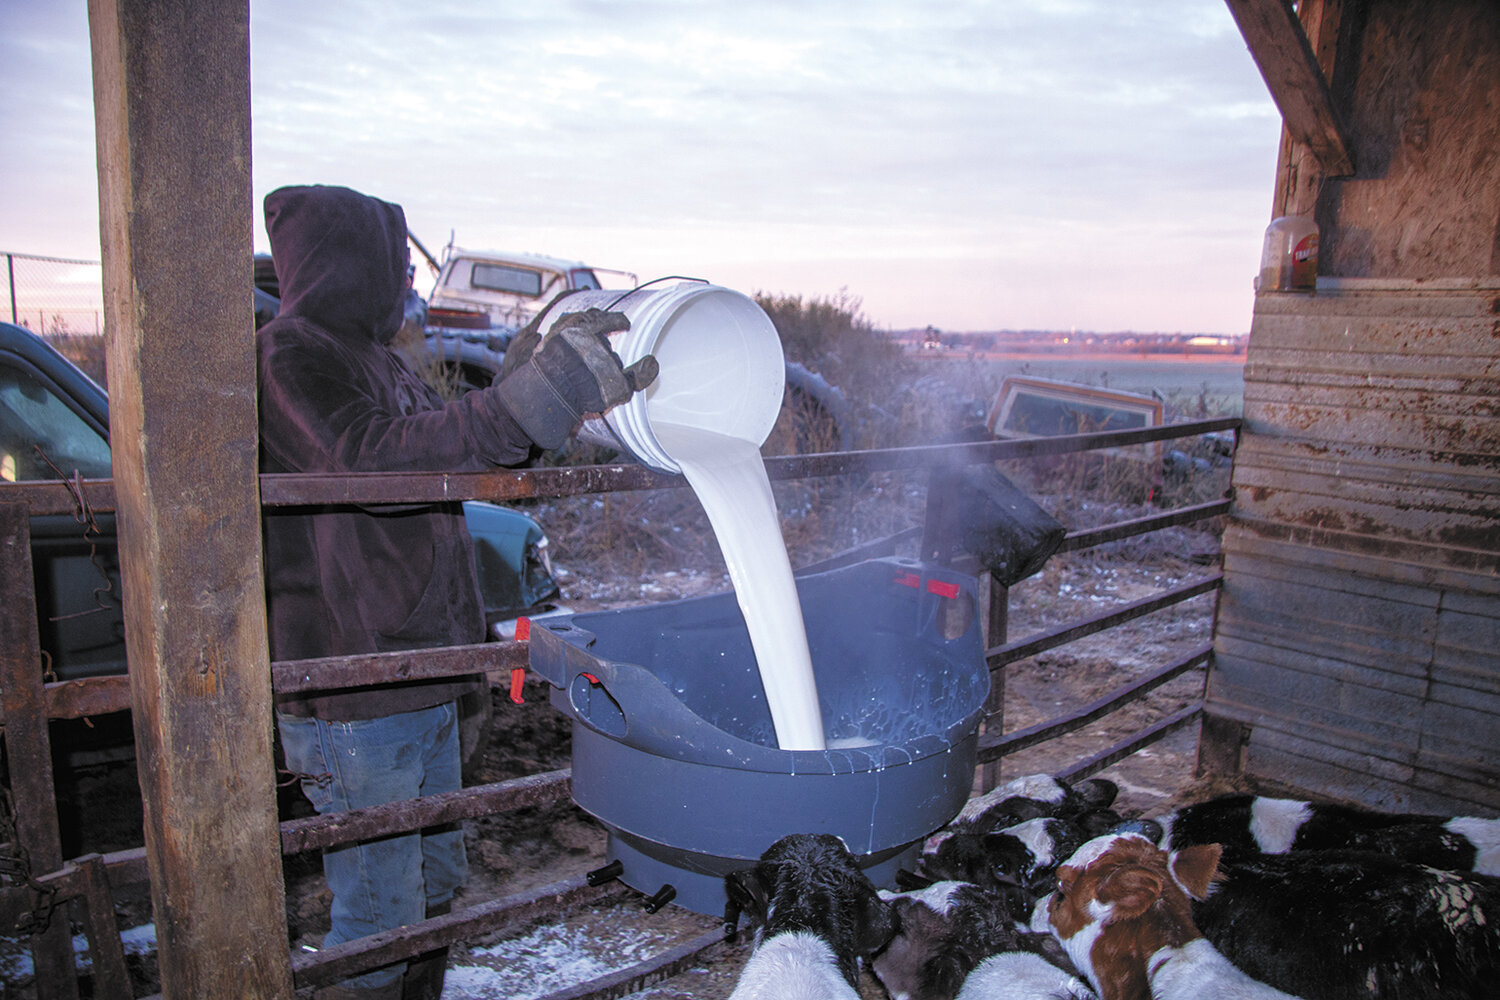 Dennis Burkle feeds milk to a group of young calves Nov. 1 at the Burkle farm near Earlville, Iowa. The Burkles uses mob feeders for their calf pens.